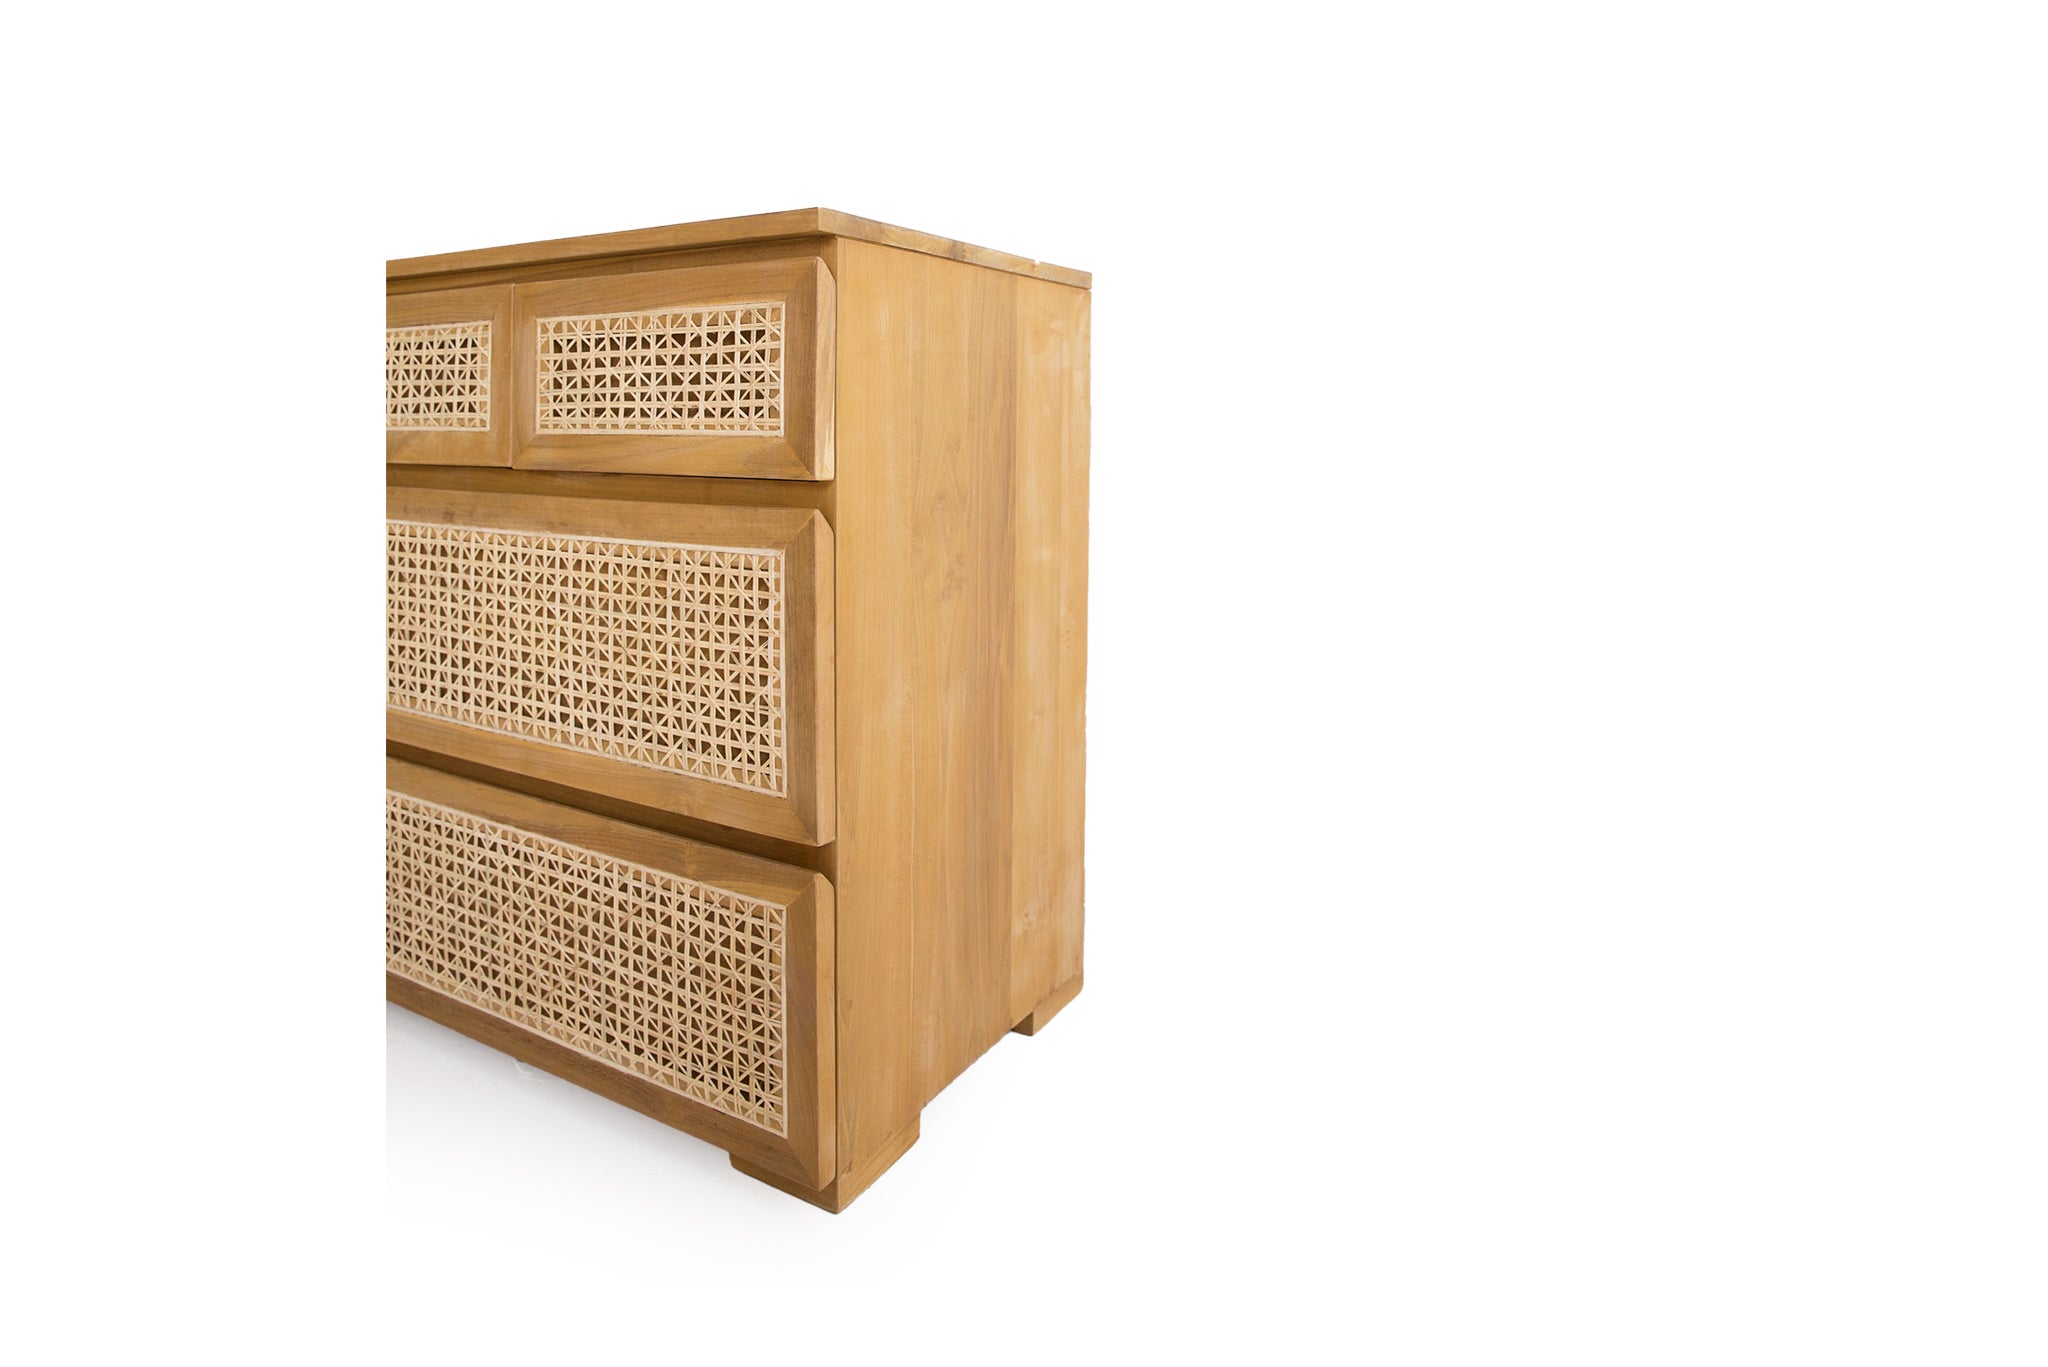 Piper Teak & Rattan Chest Of Drawers – Five Drawer